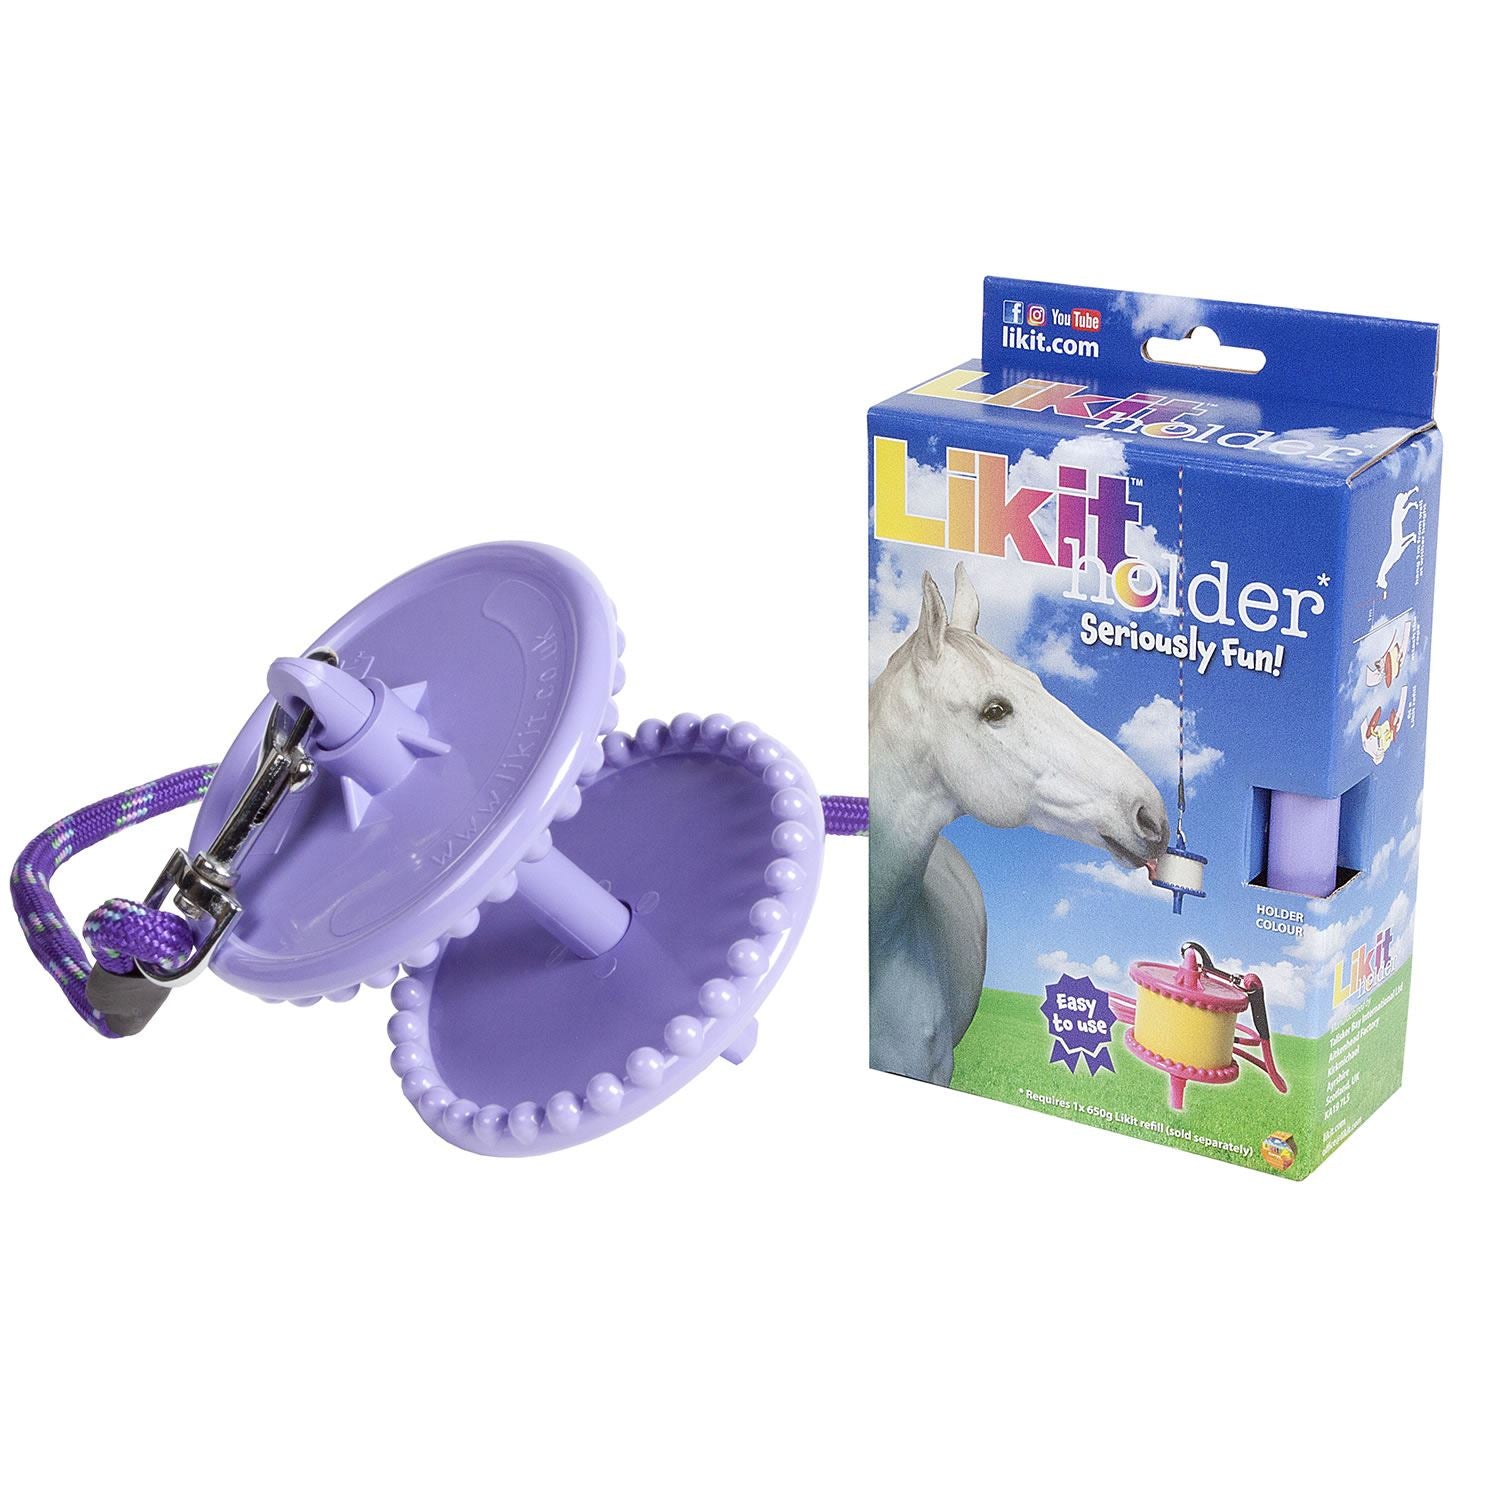 Likit Holder - Just Horse Riders